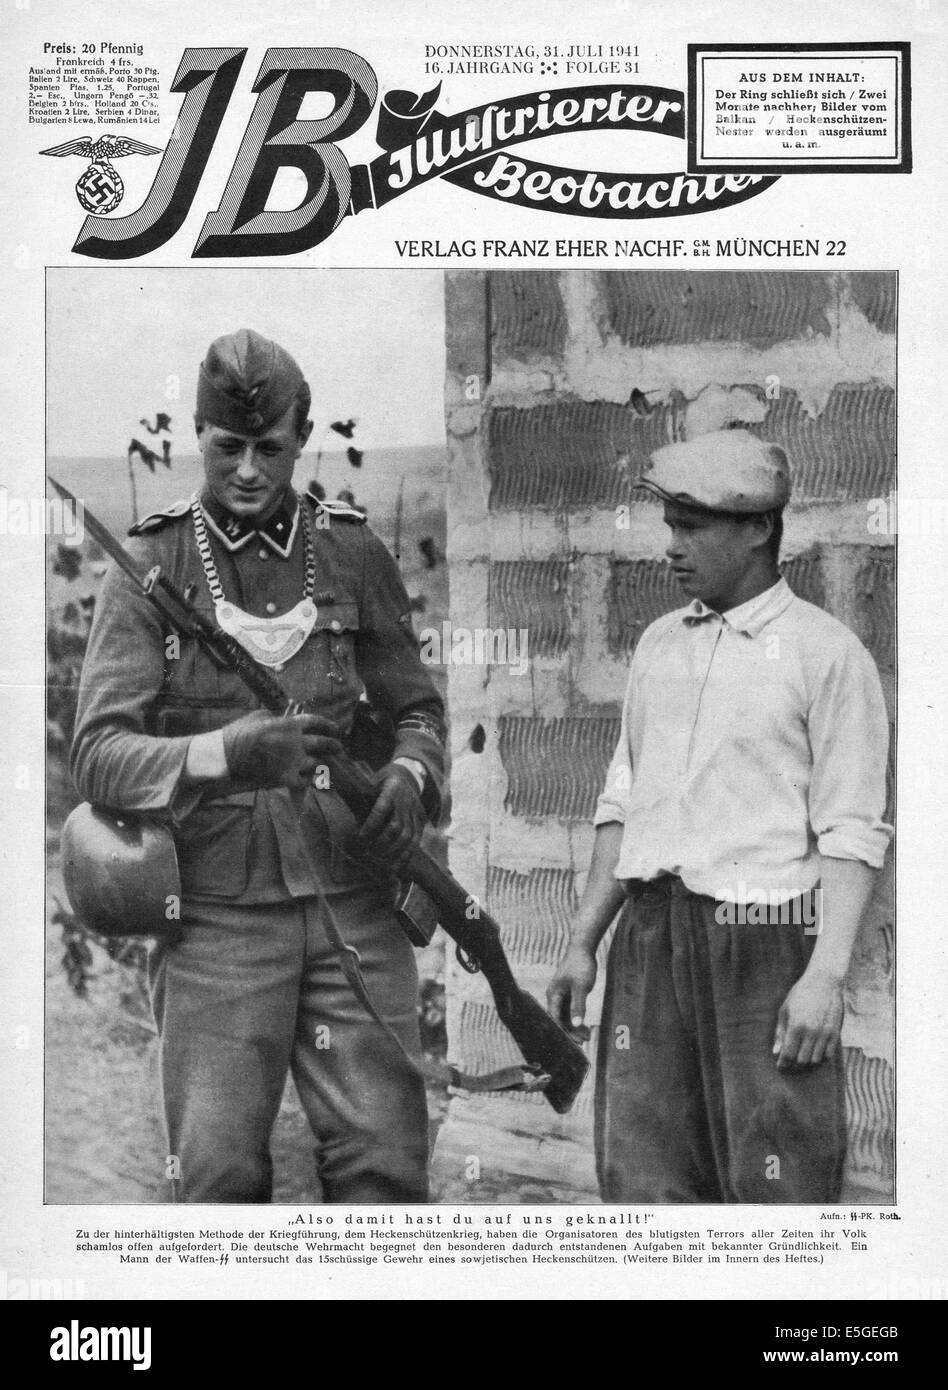 1941 Illustrierte Beobachter front page showing a Waffen SS soldier in Russia Stock Photo